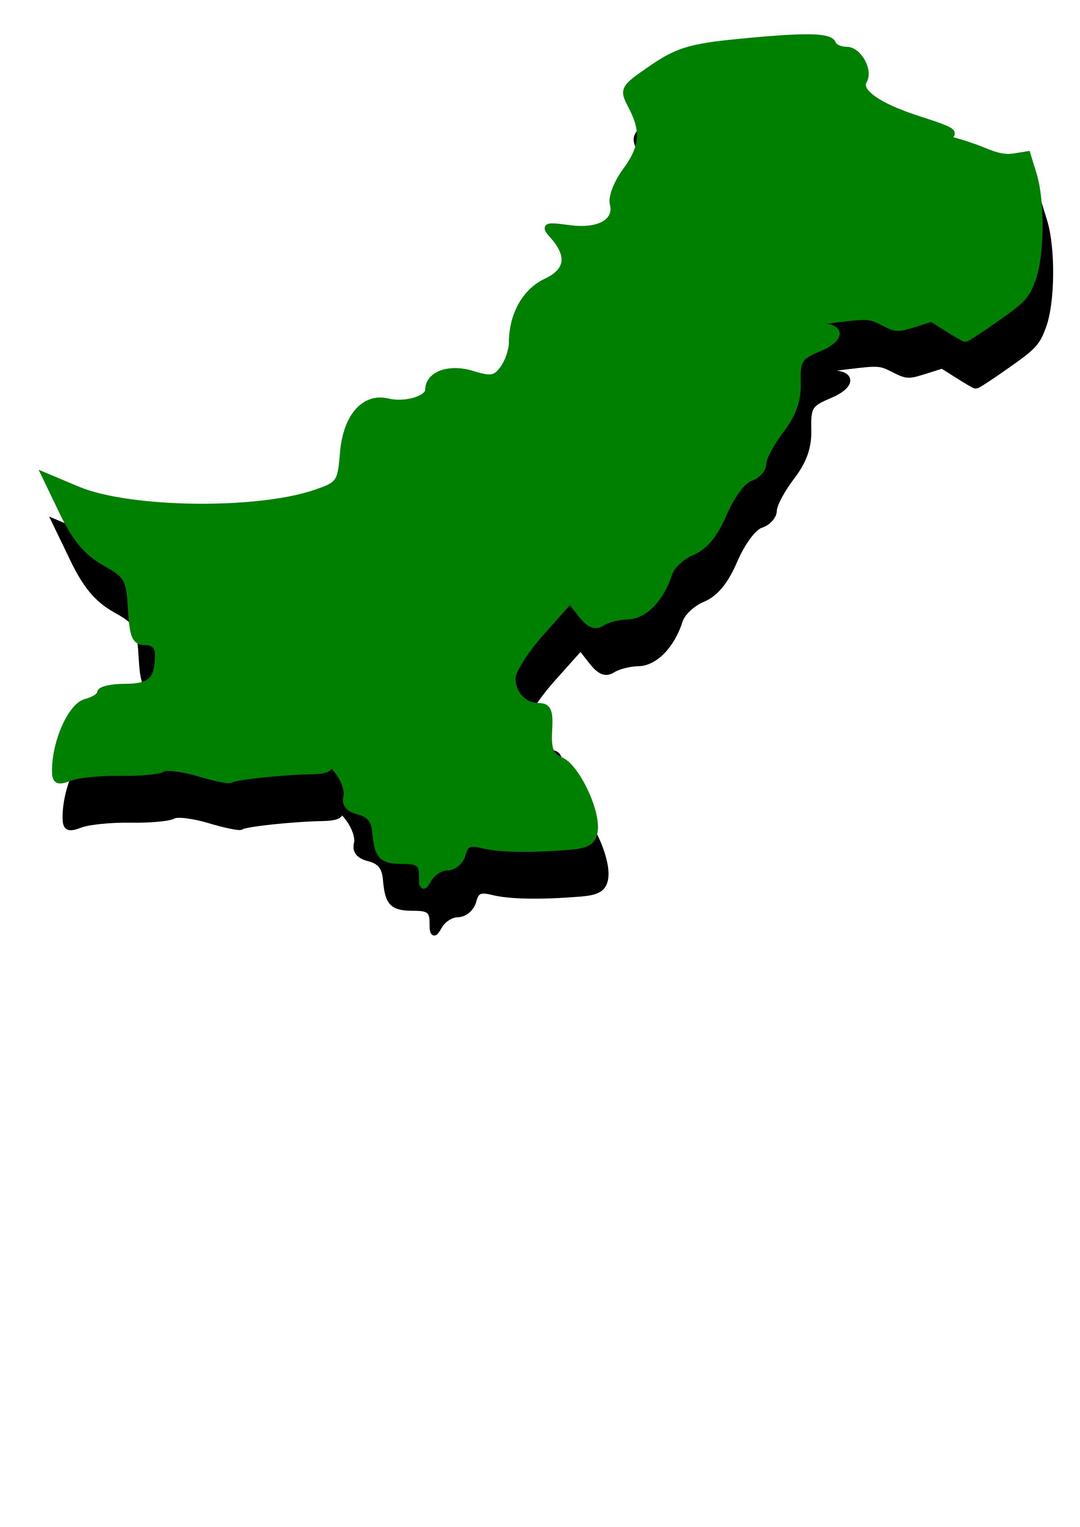 Embossed outline map of Pakistan with green fill png transparent